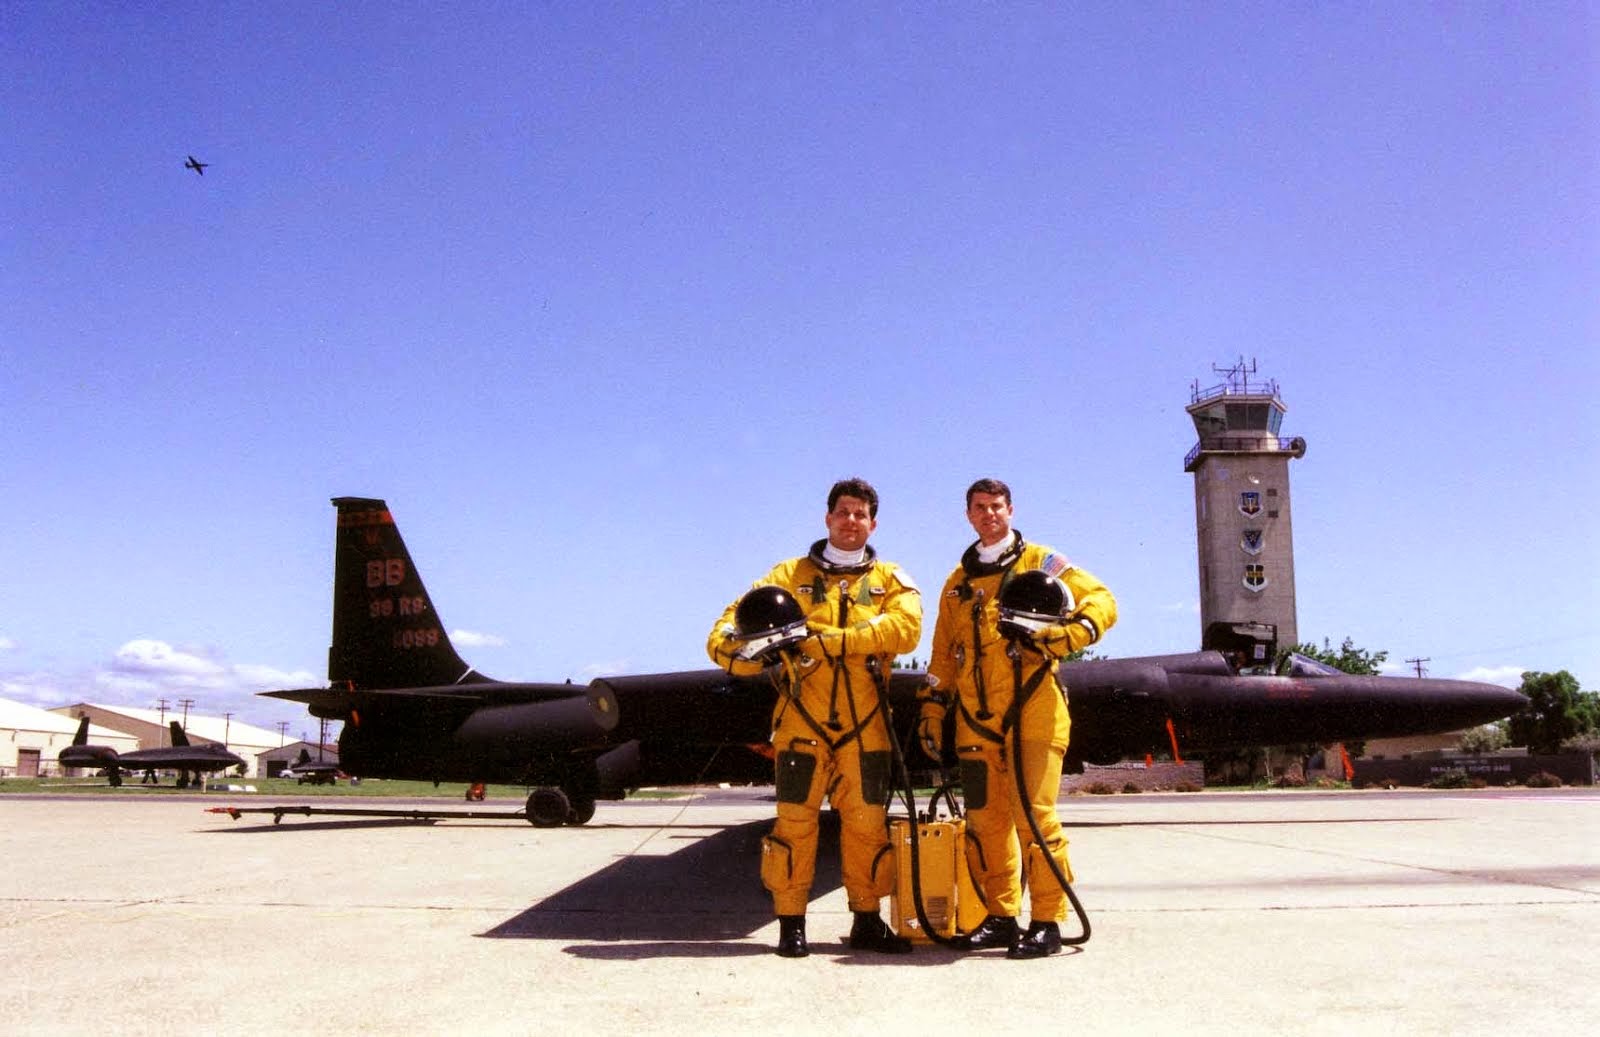 LtCol Bryan Anderson takes Gary Powers Jr. for a ride in the U-2 dragonlady